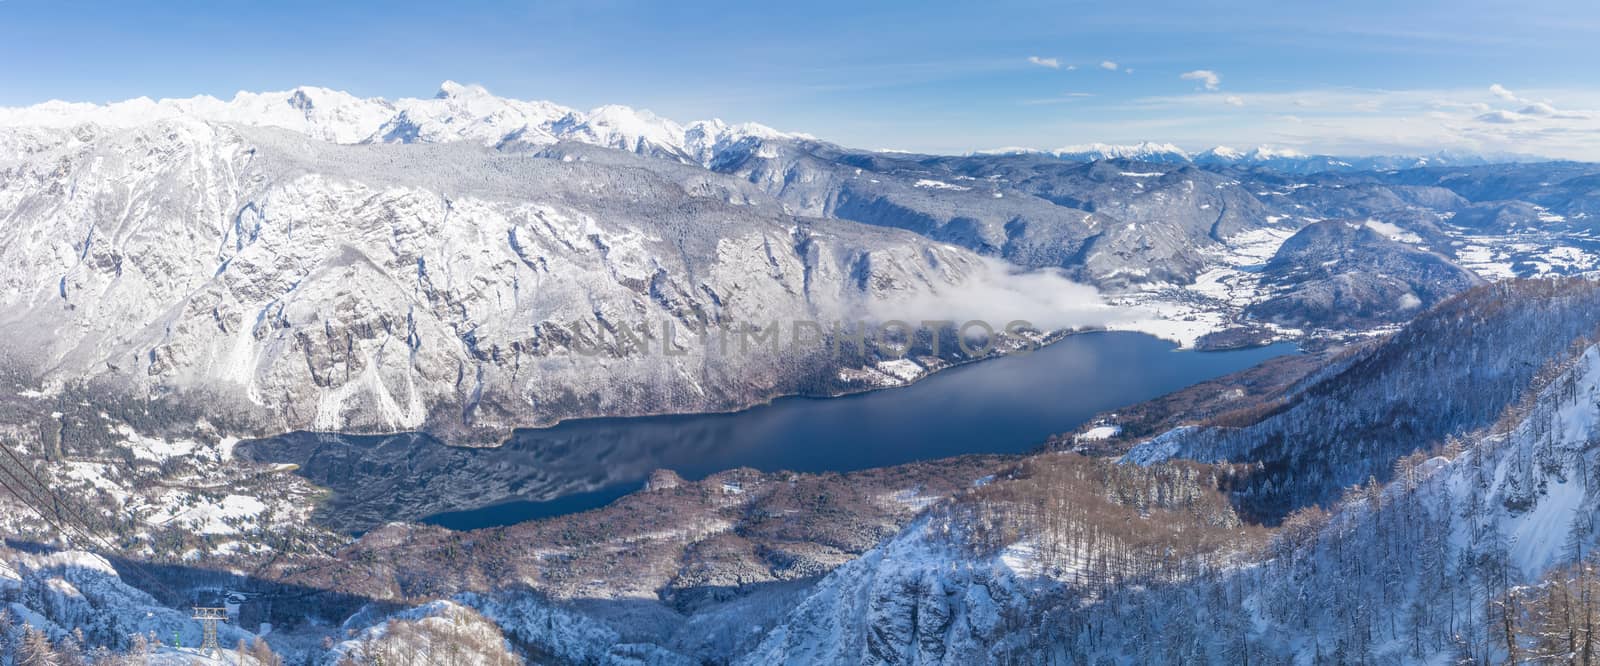 View of the Lake Bohinj and the surrounding mountains in winter. by kasto